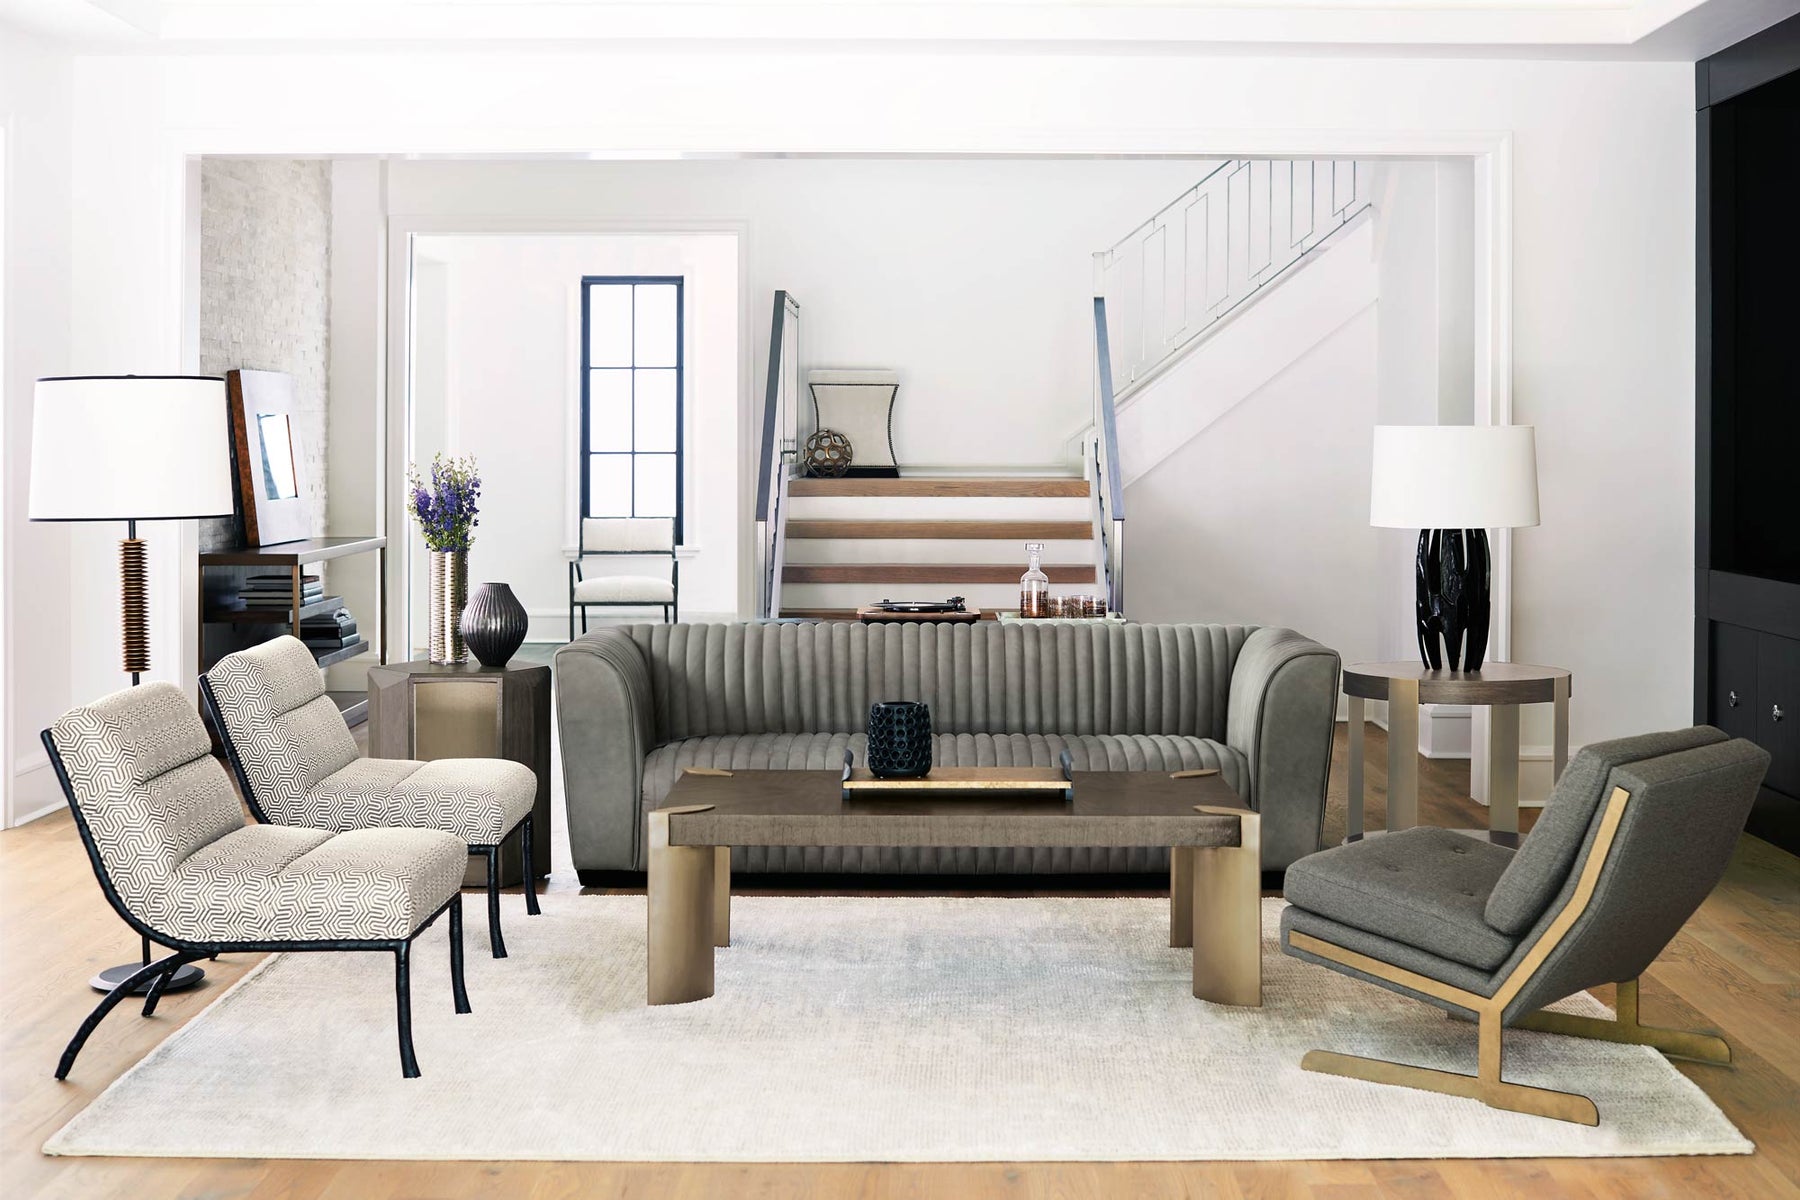 Find The Look You Love: California Contemporary